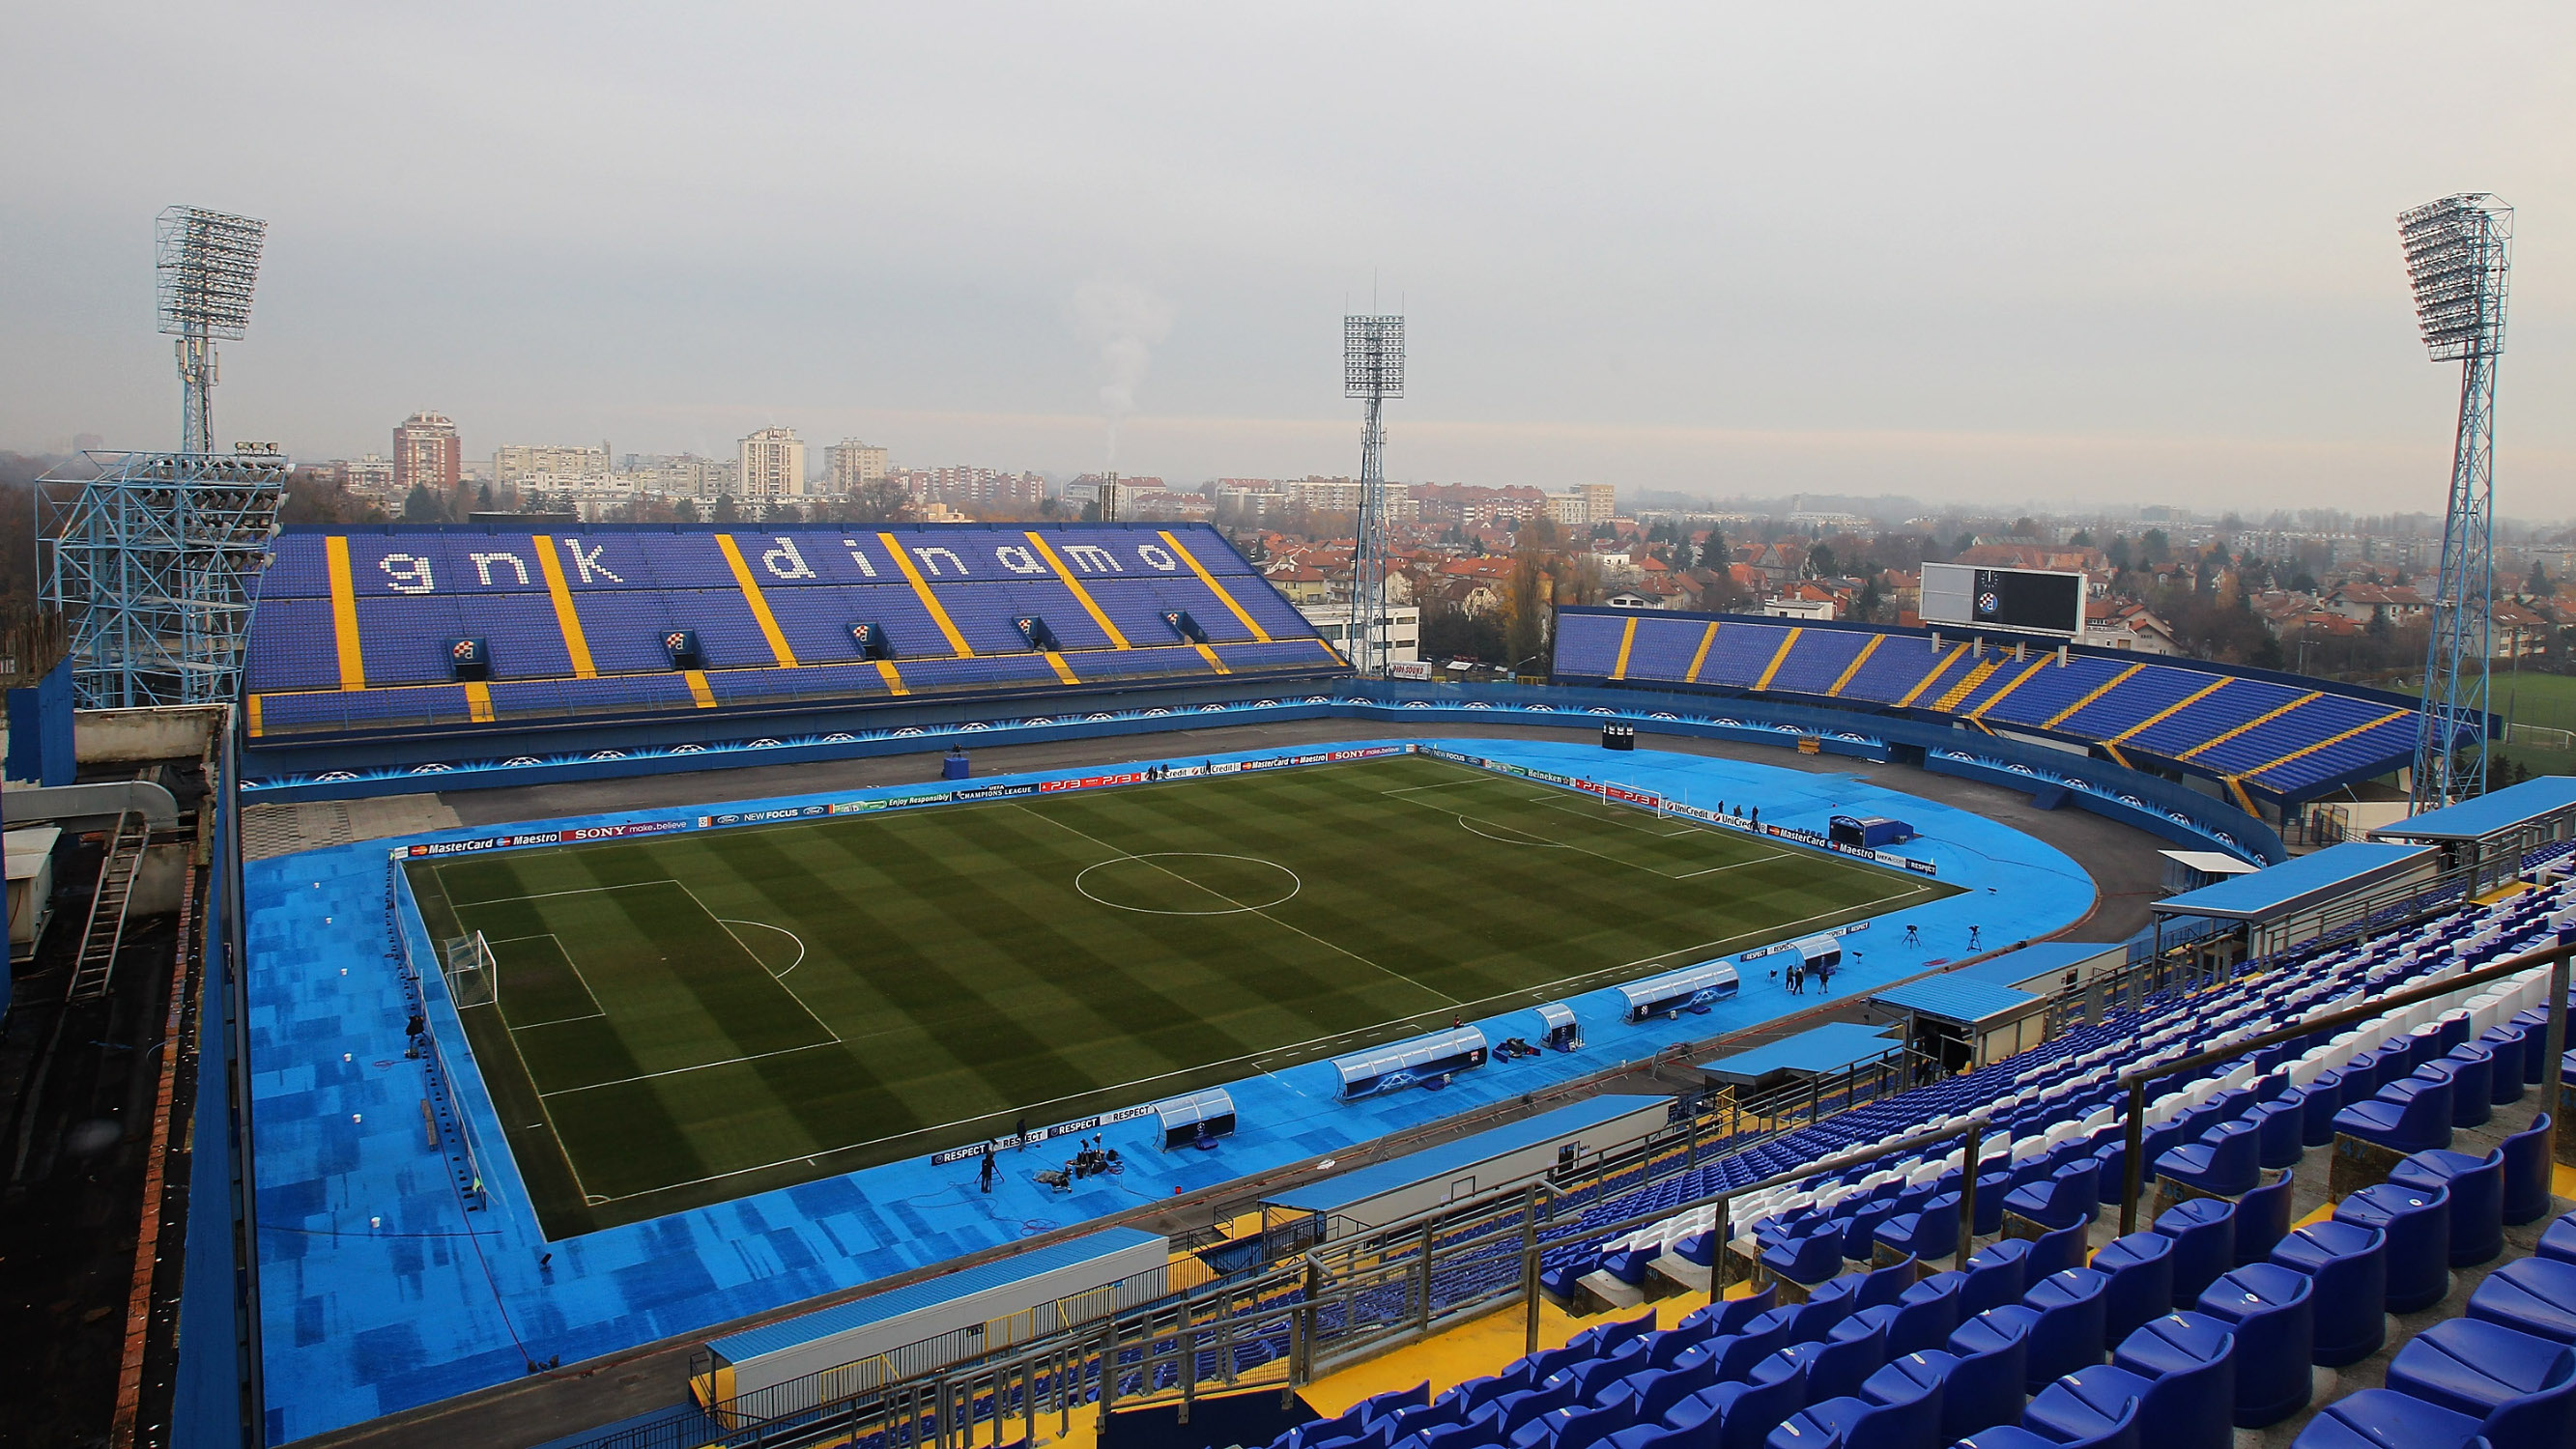 ZAGREB, CROATIA - DECEMBER 07:  A general view of Maksimir Stadium on December 7, 2011 in Zagreb, Croatia.  (Photo by Matthew Lewis/Getty Images)